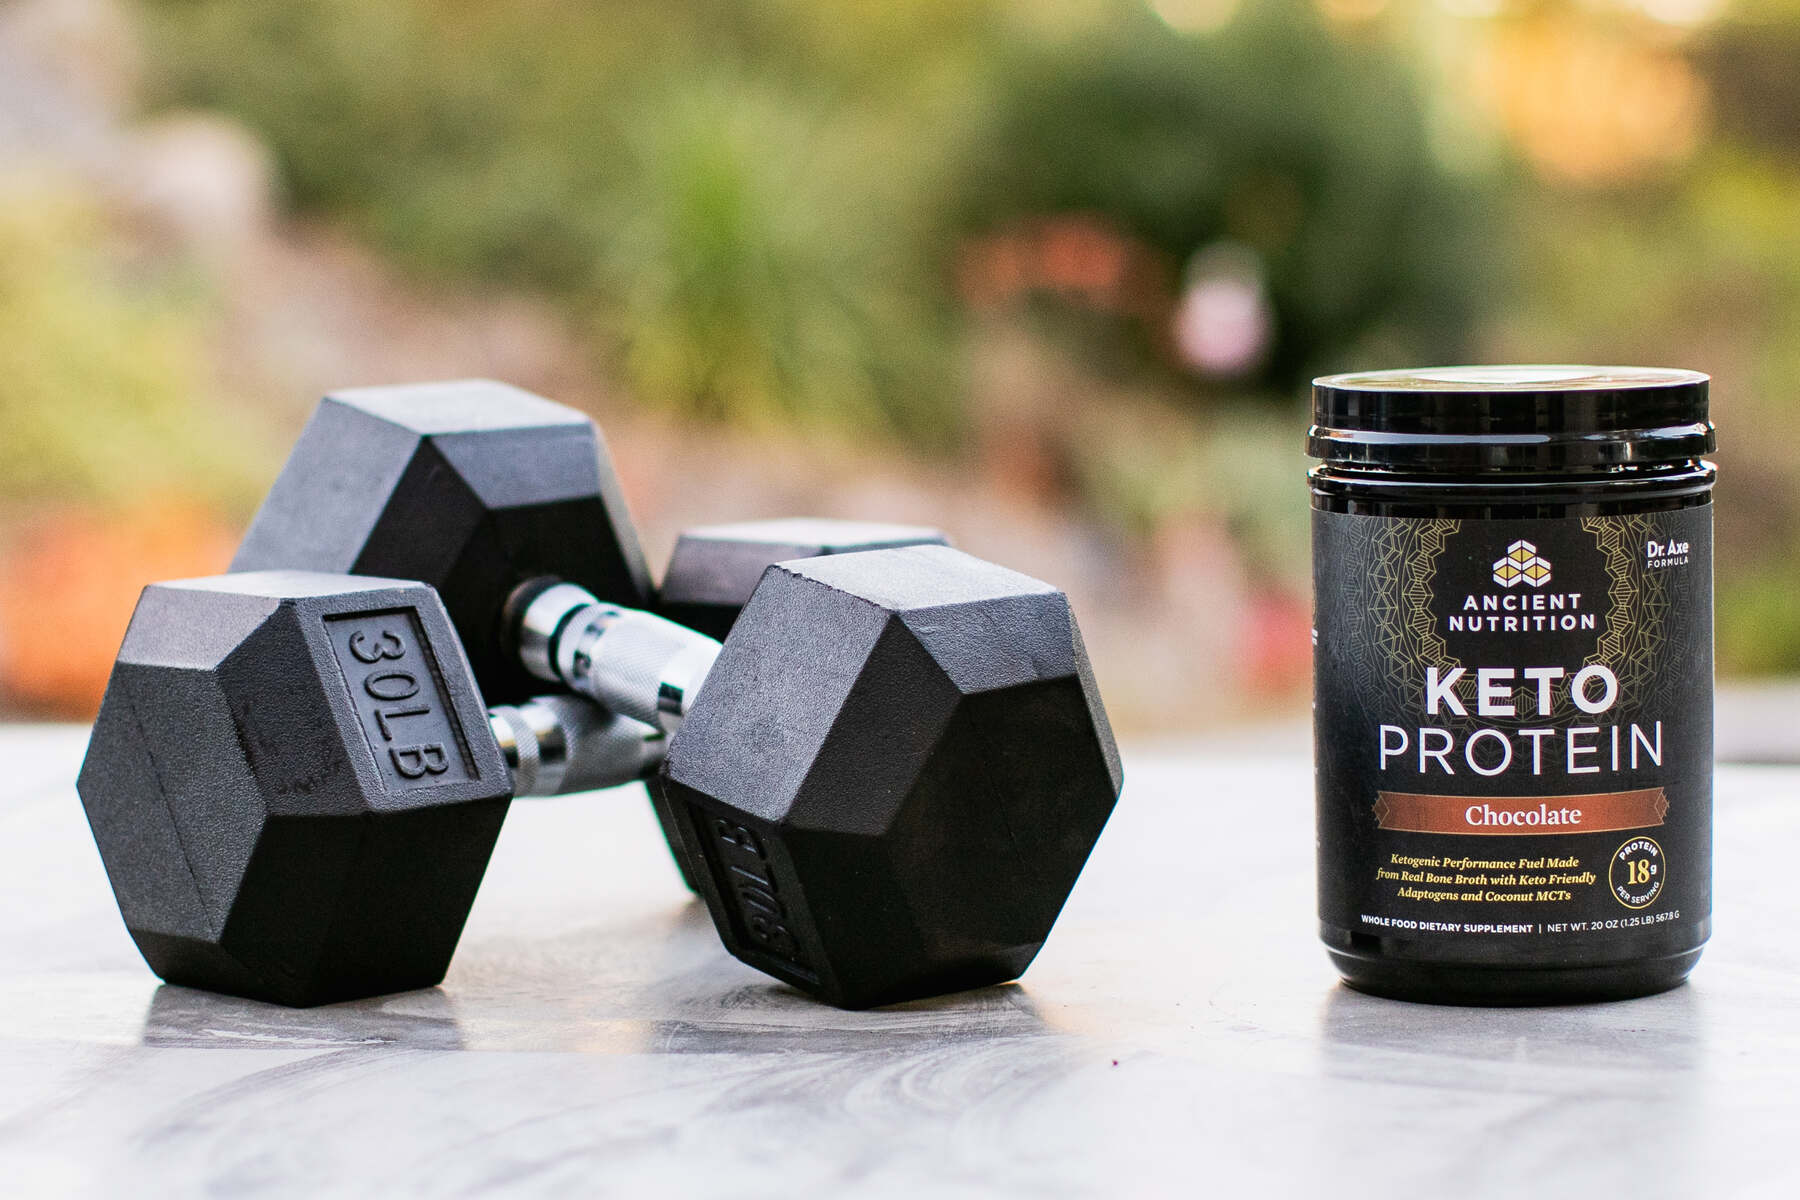 Outdoor setting with a container of Ancient Nutrition Keto Protein in chocolate flavor next to a pair of 30lb dumbbells